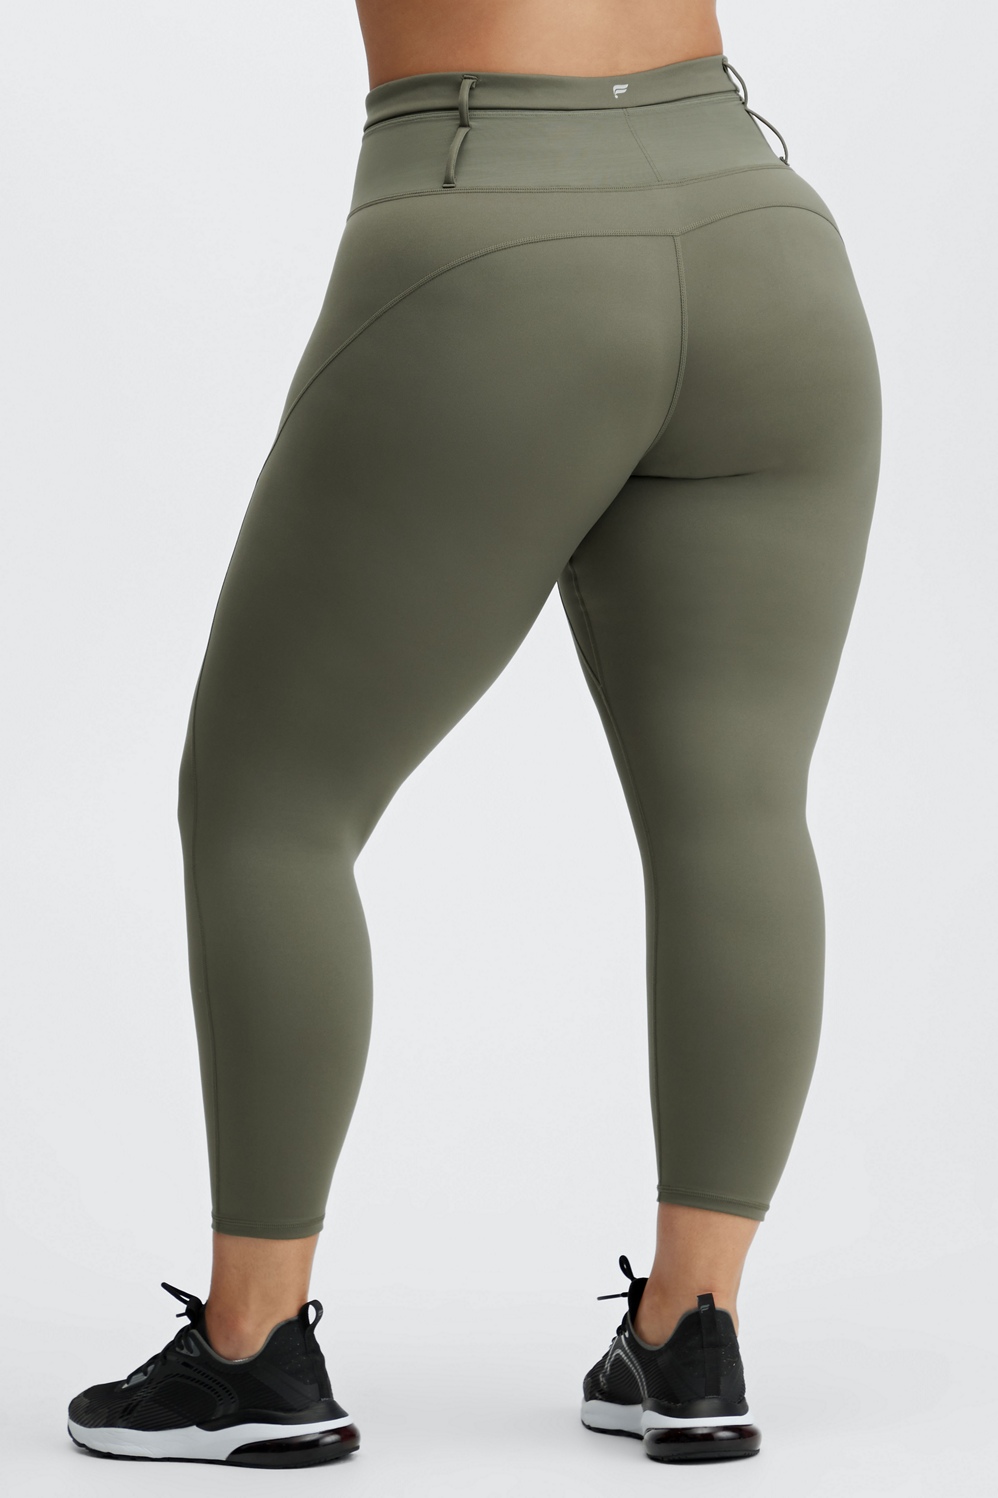 Women's High-waisted Flare Leggings - Wild Fable™ Olive Green Xs